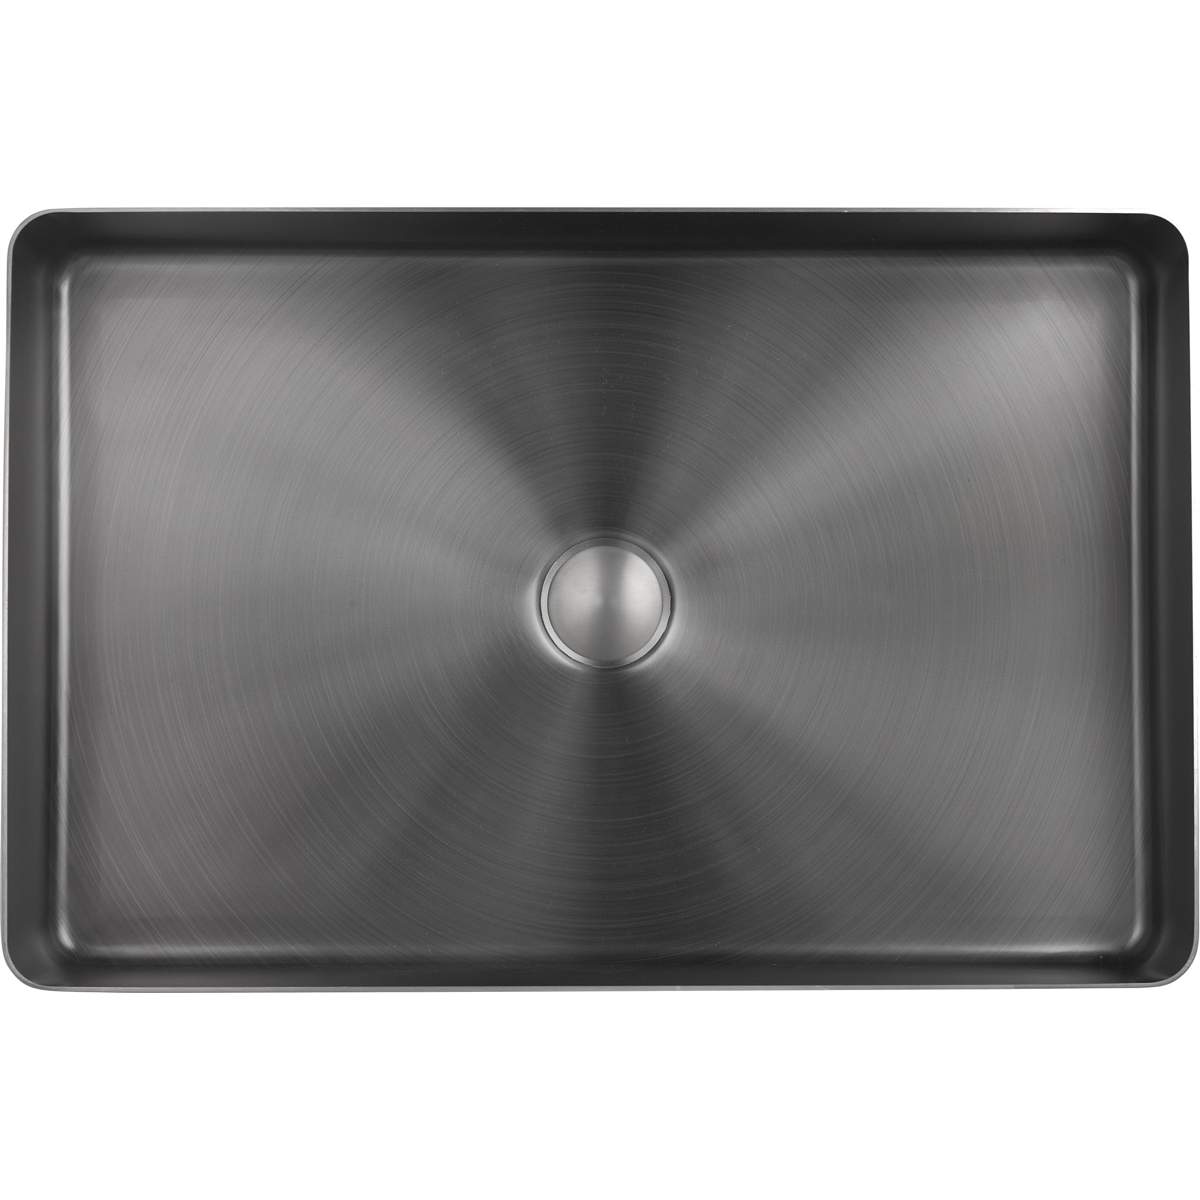 JTP Vos Brushed Black Grade 316 Stainless Steel Counter Top Basin - 27CTS520BBL